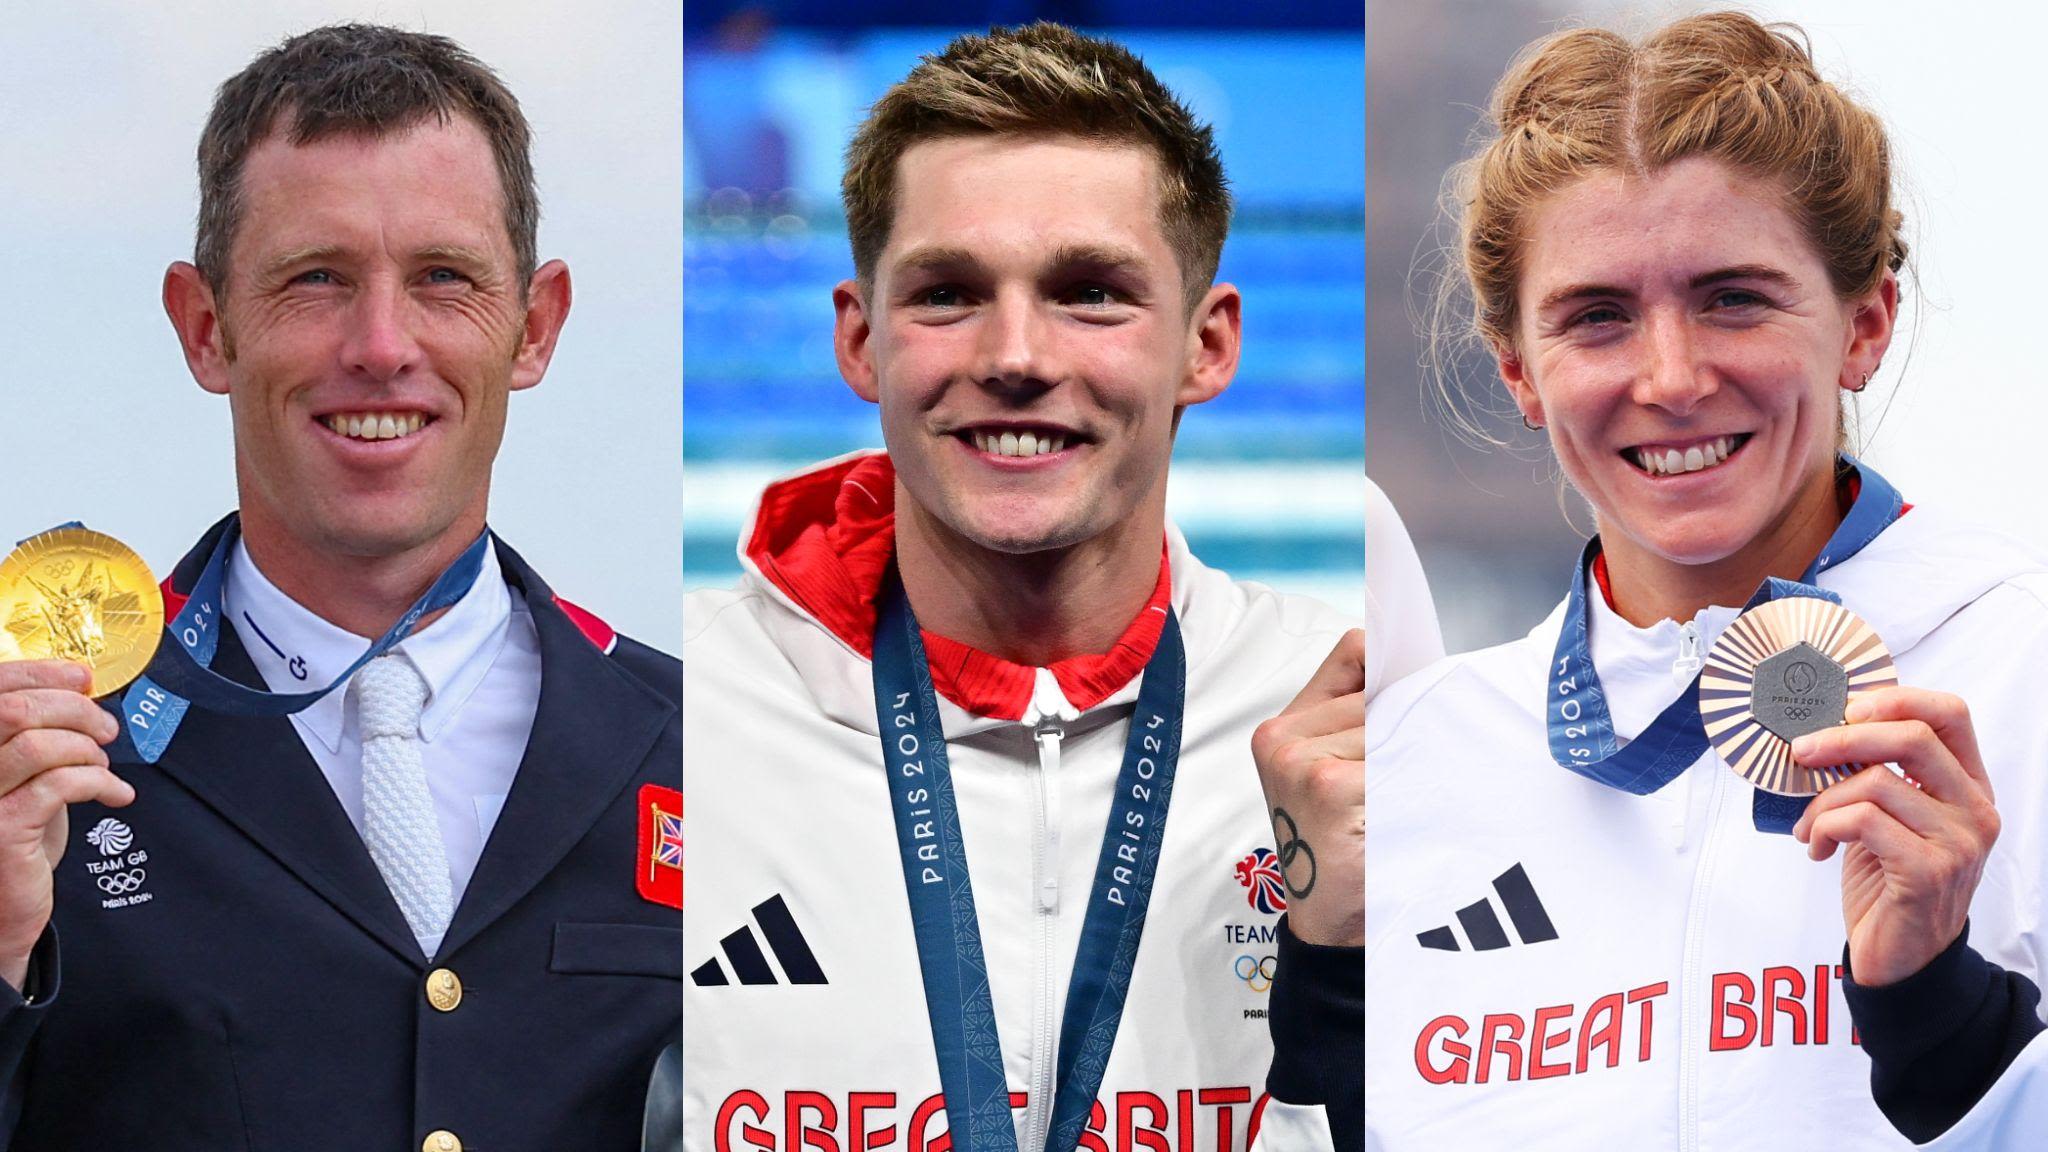 Seven medals won, but how many more can the Scots get?